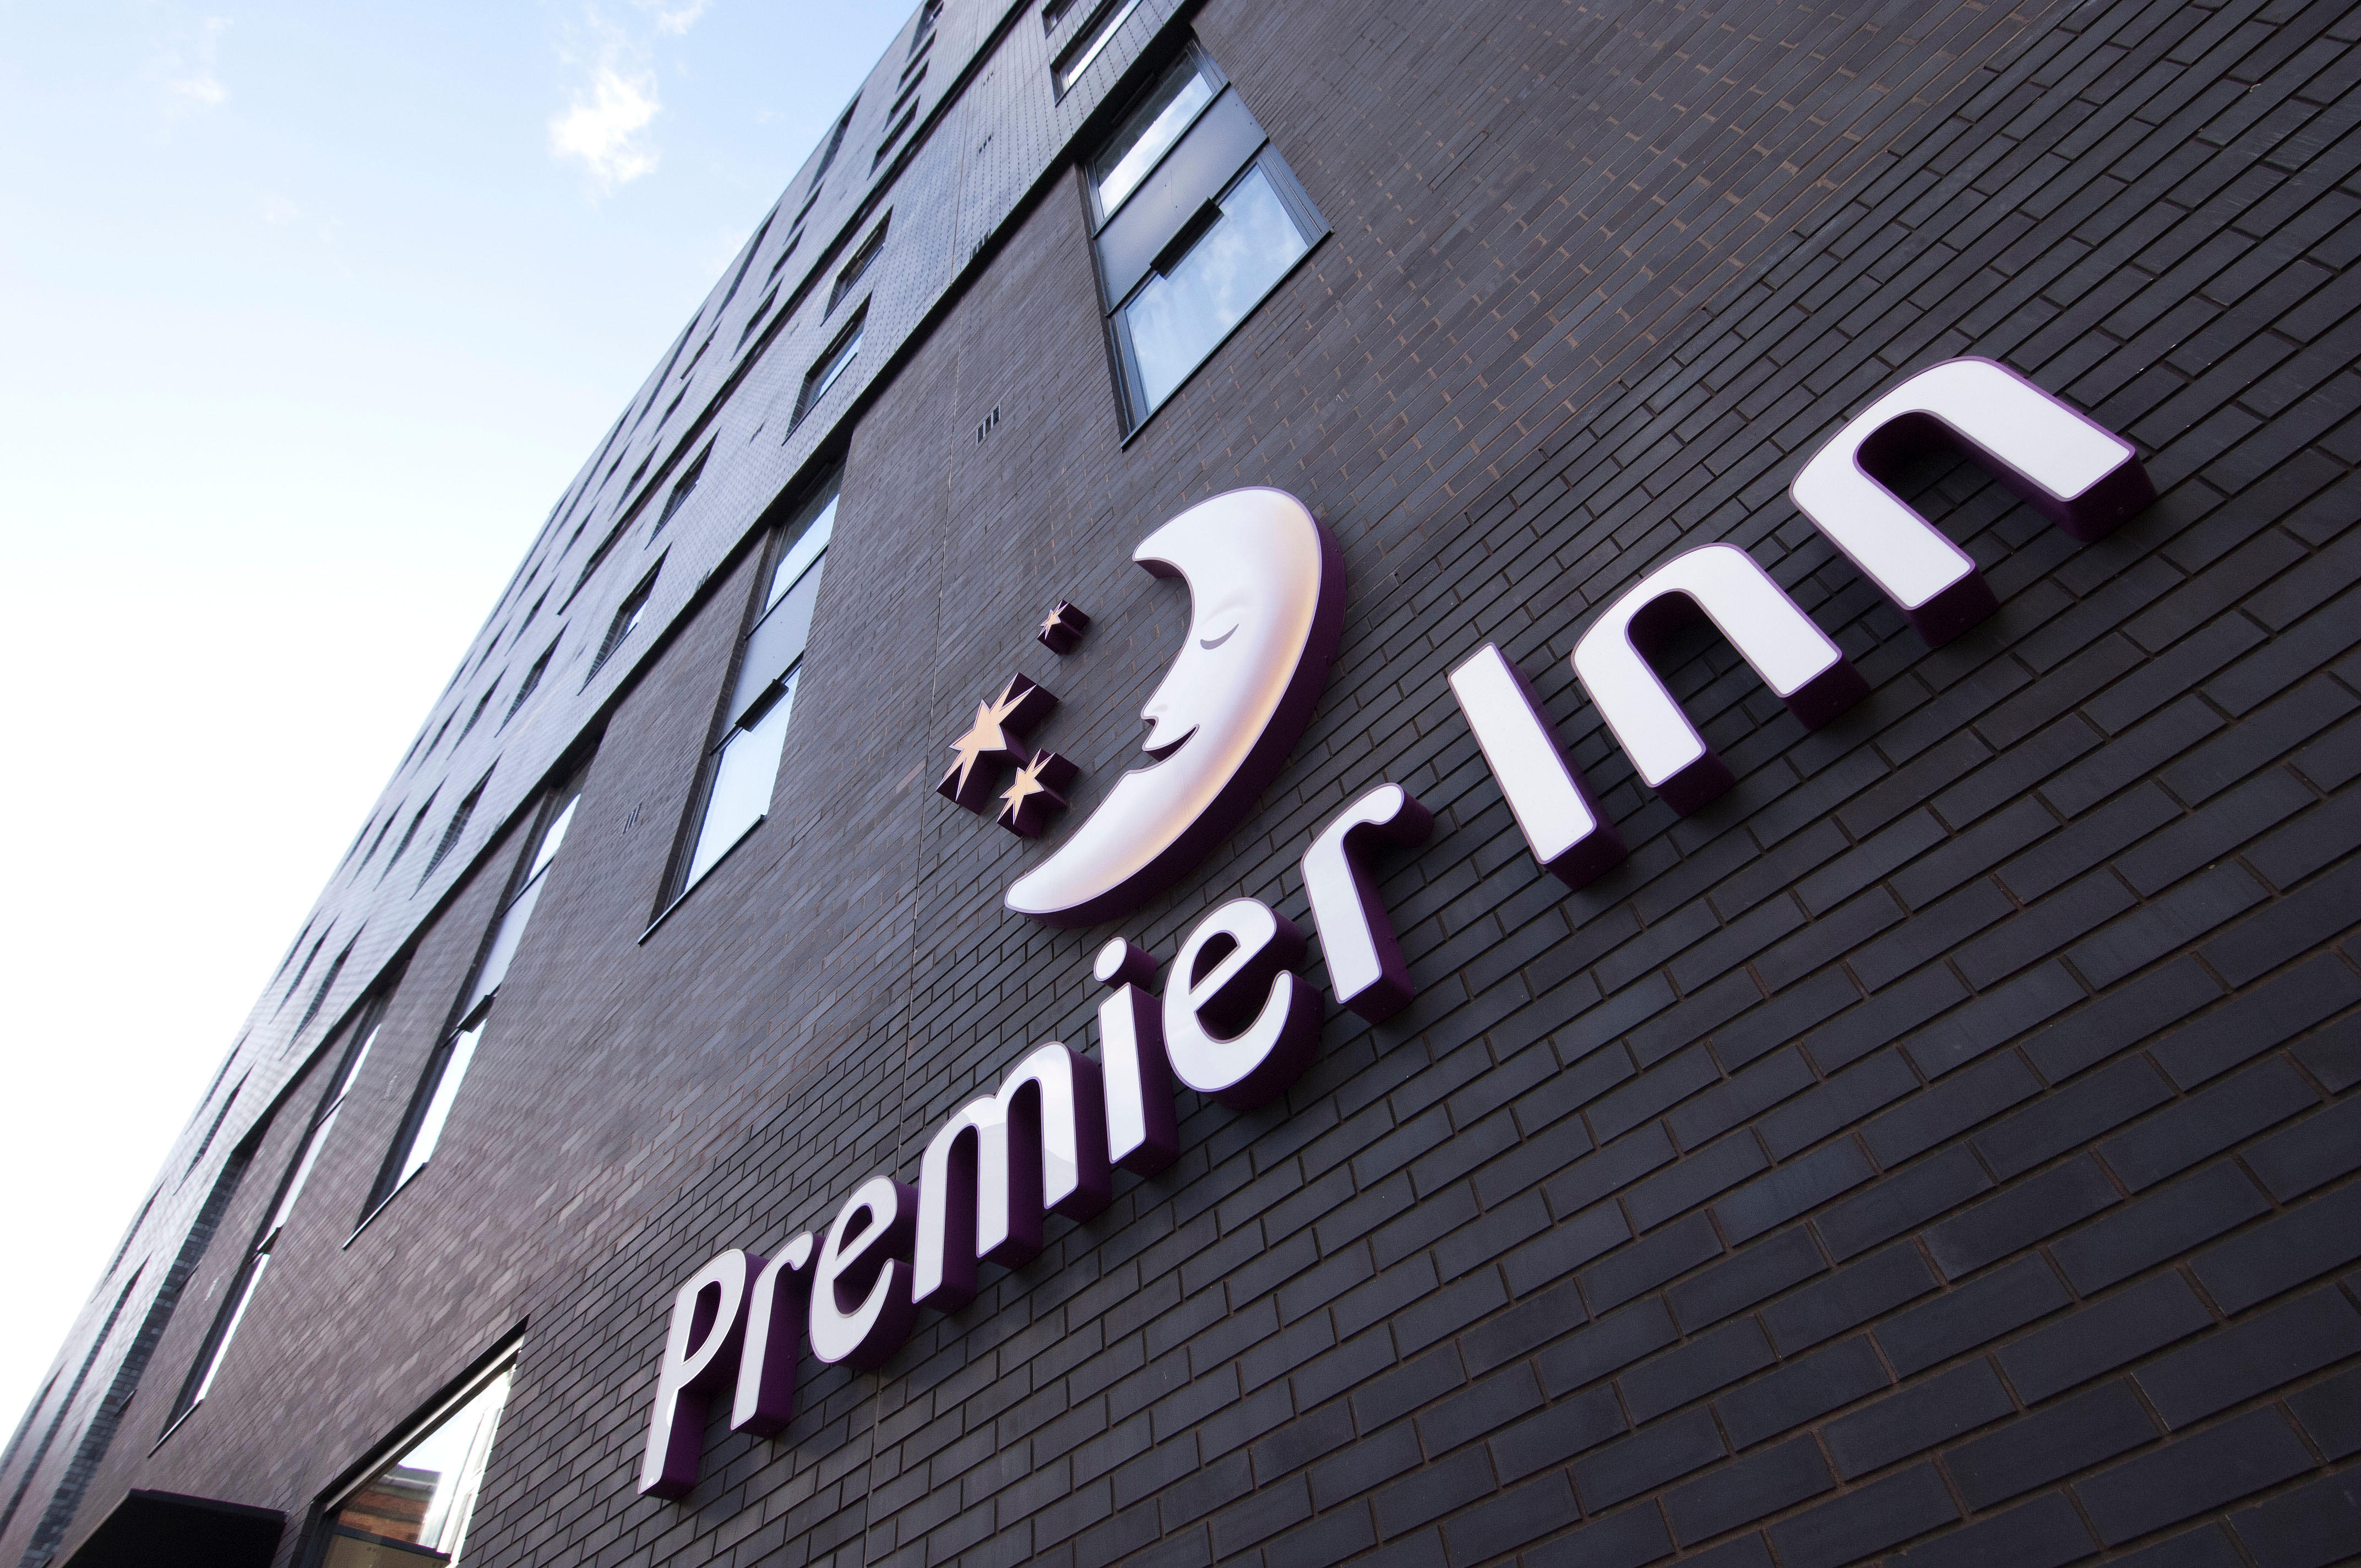 Premier Inn Manchester City (Piccadilly) hotel Premier Inn Manchester City (Piccadilly) hotel Manchester 03333 219286